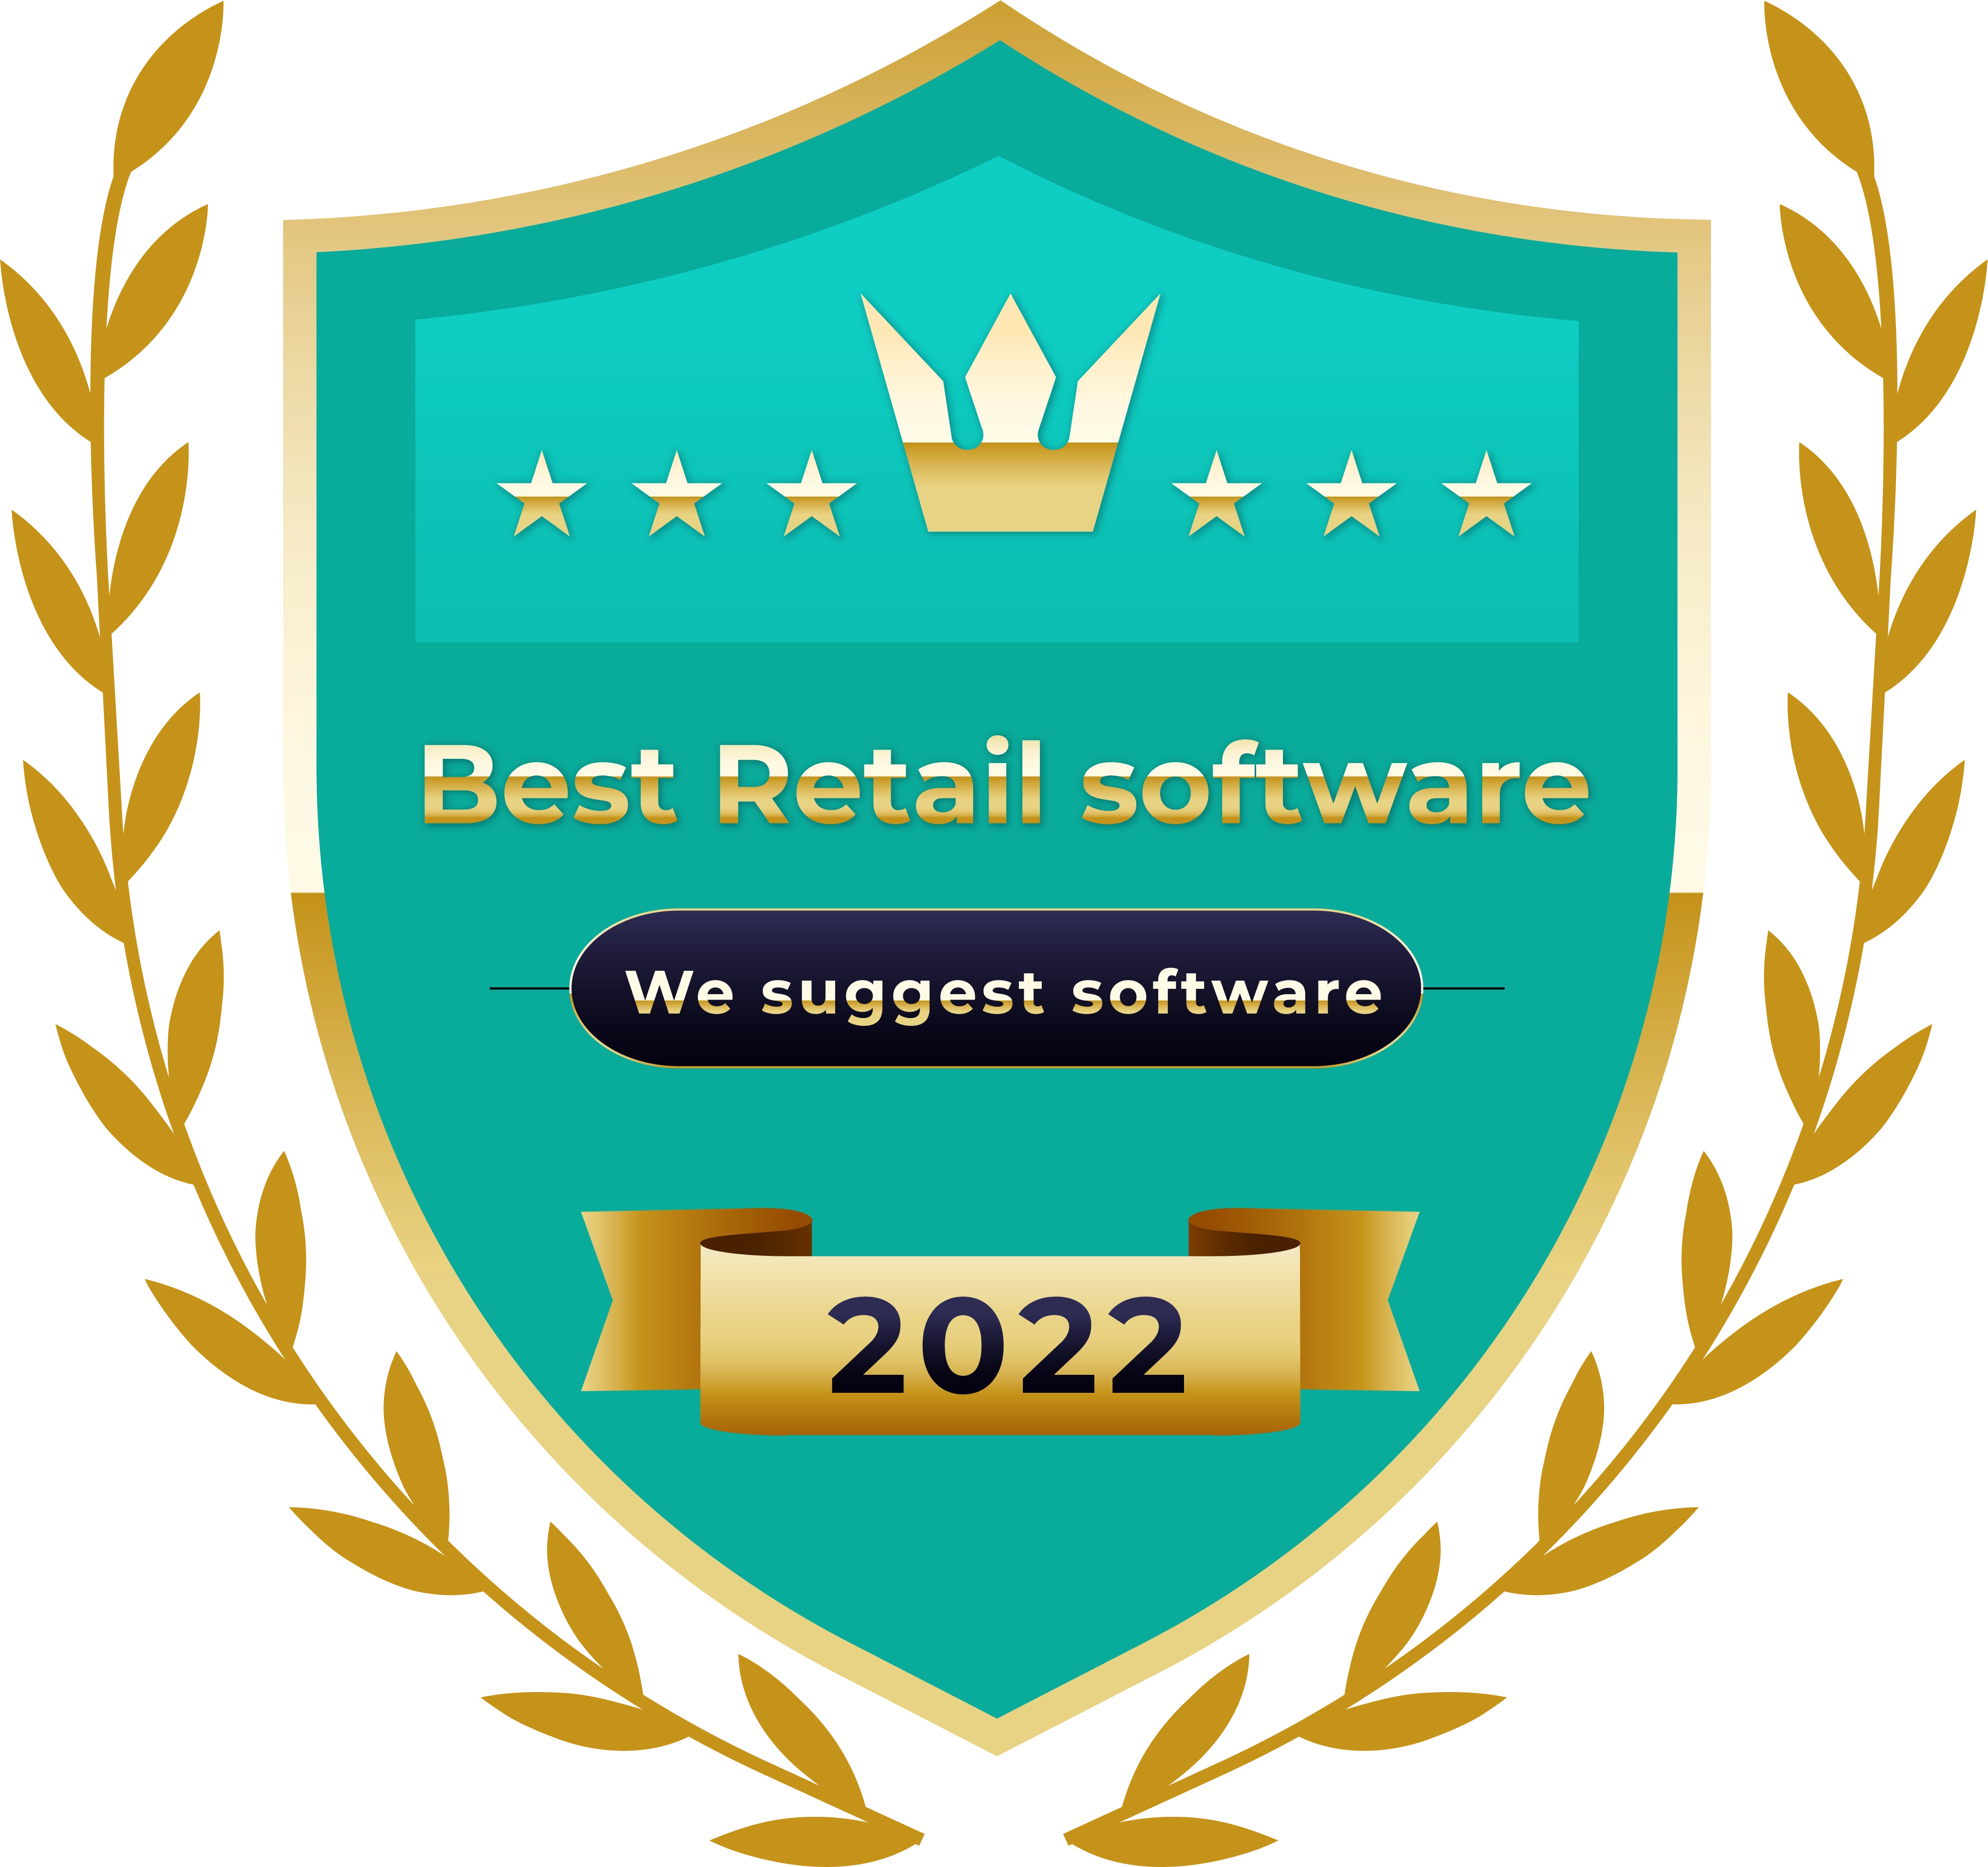 Shield with crown and laurel wreath, promoting retail software